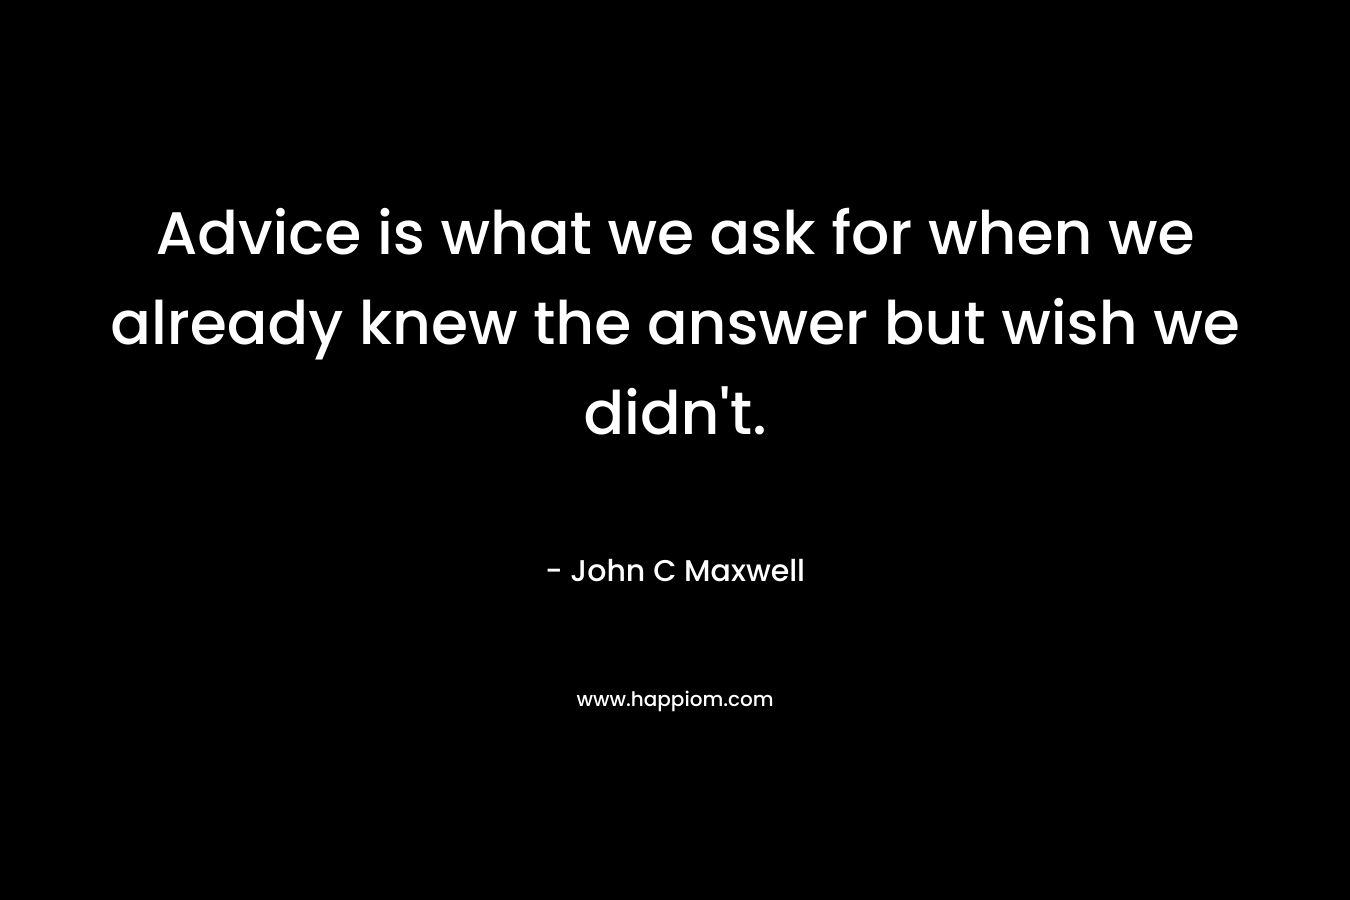 Advice is what we ask for when we already knew the answer but wish we didn't.